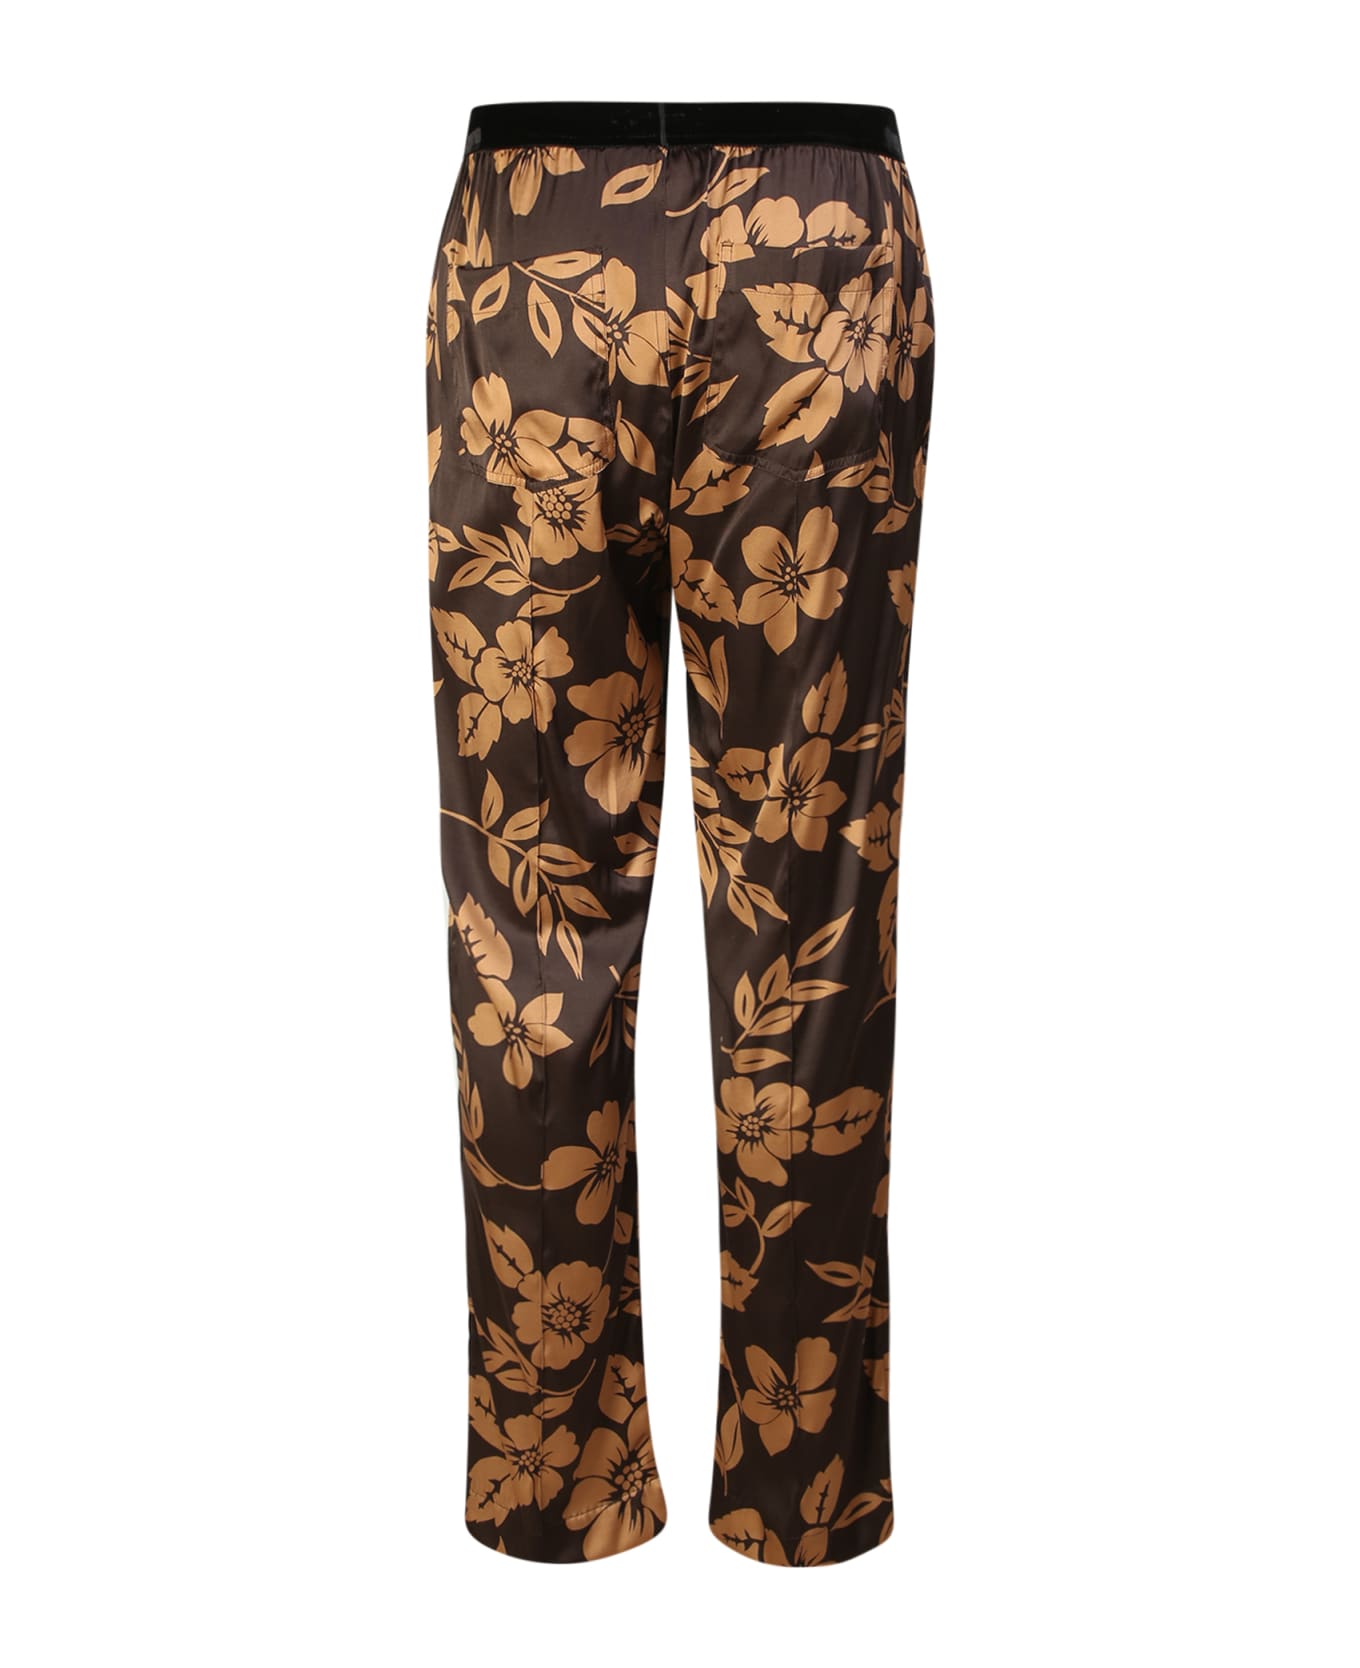 Tom Ford Multicolor Flower Trousers - Brown